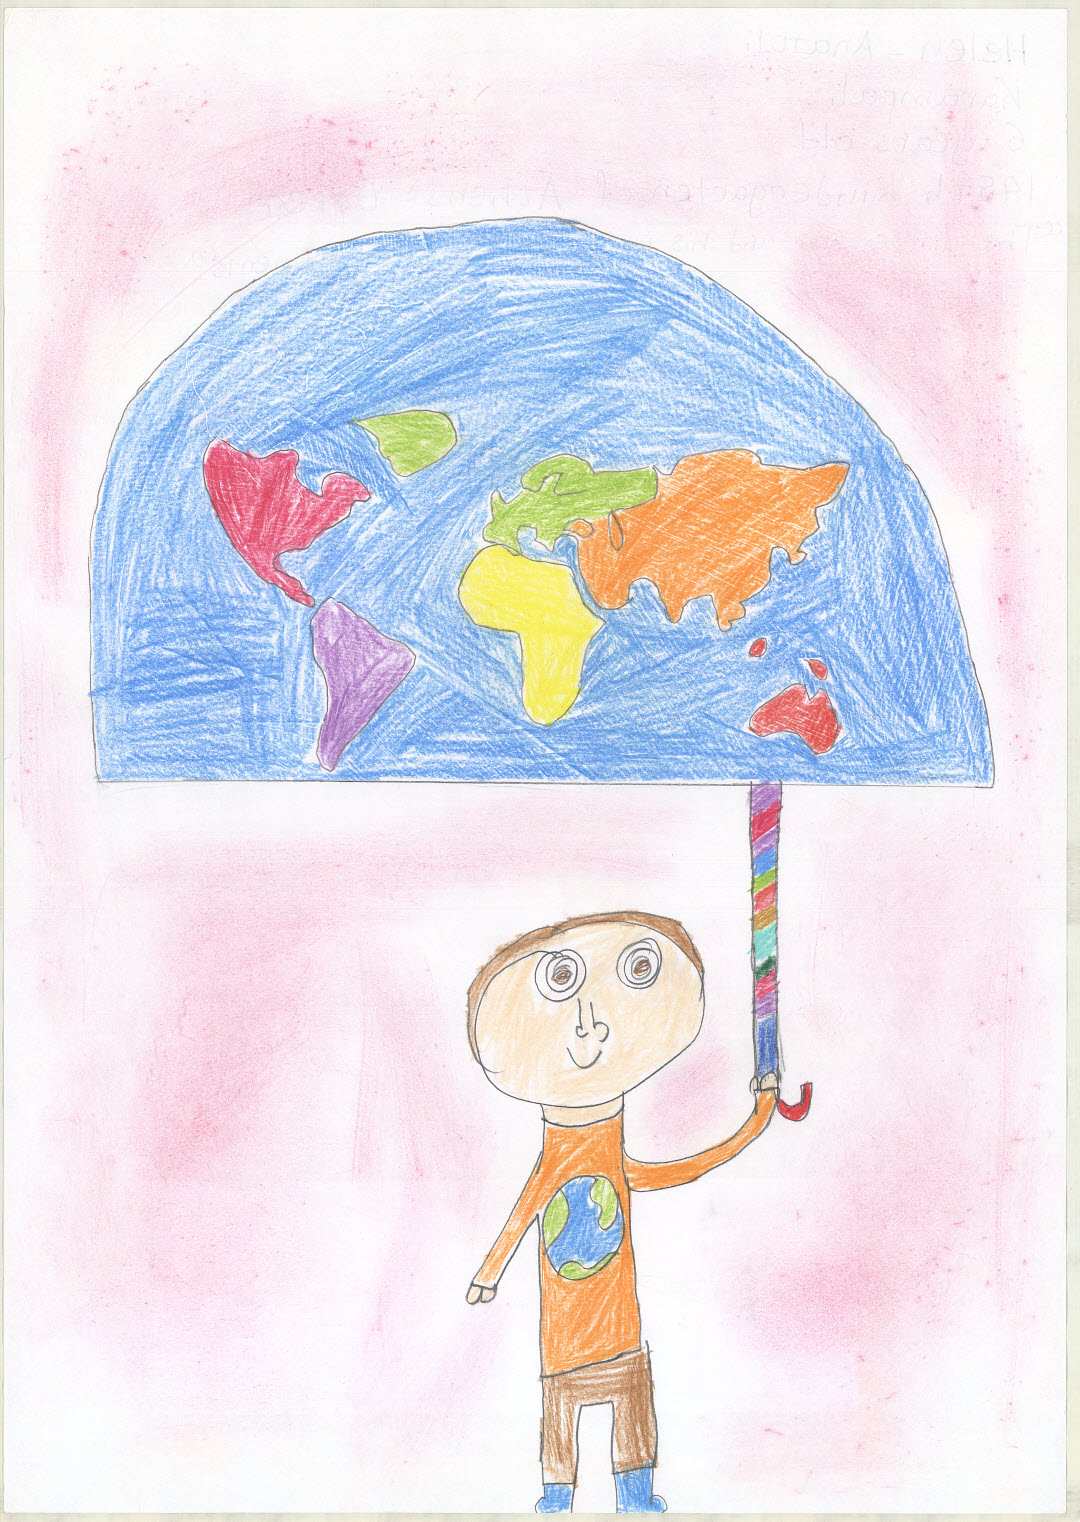 A boy holding a umbrella, with all 5 continents in colour